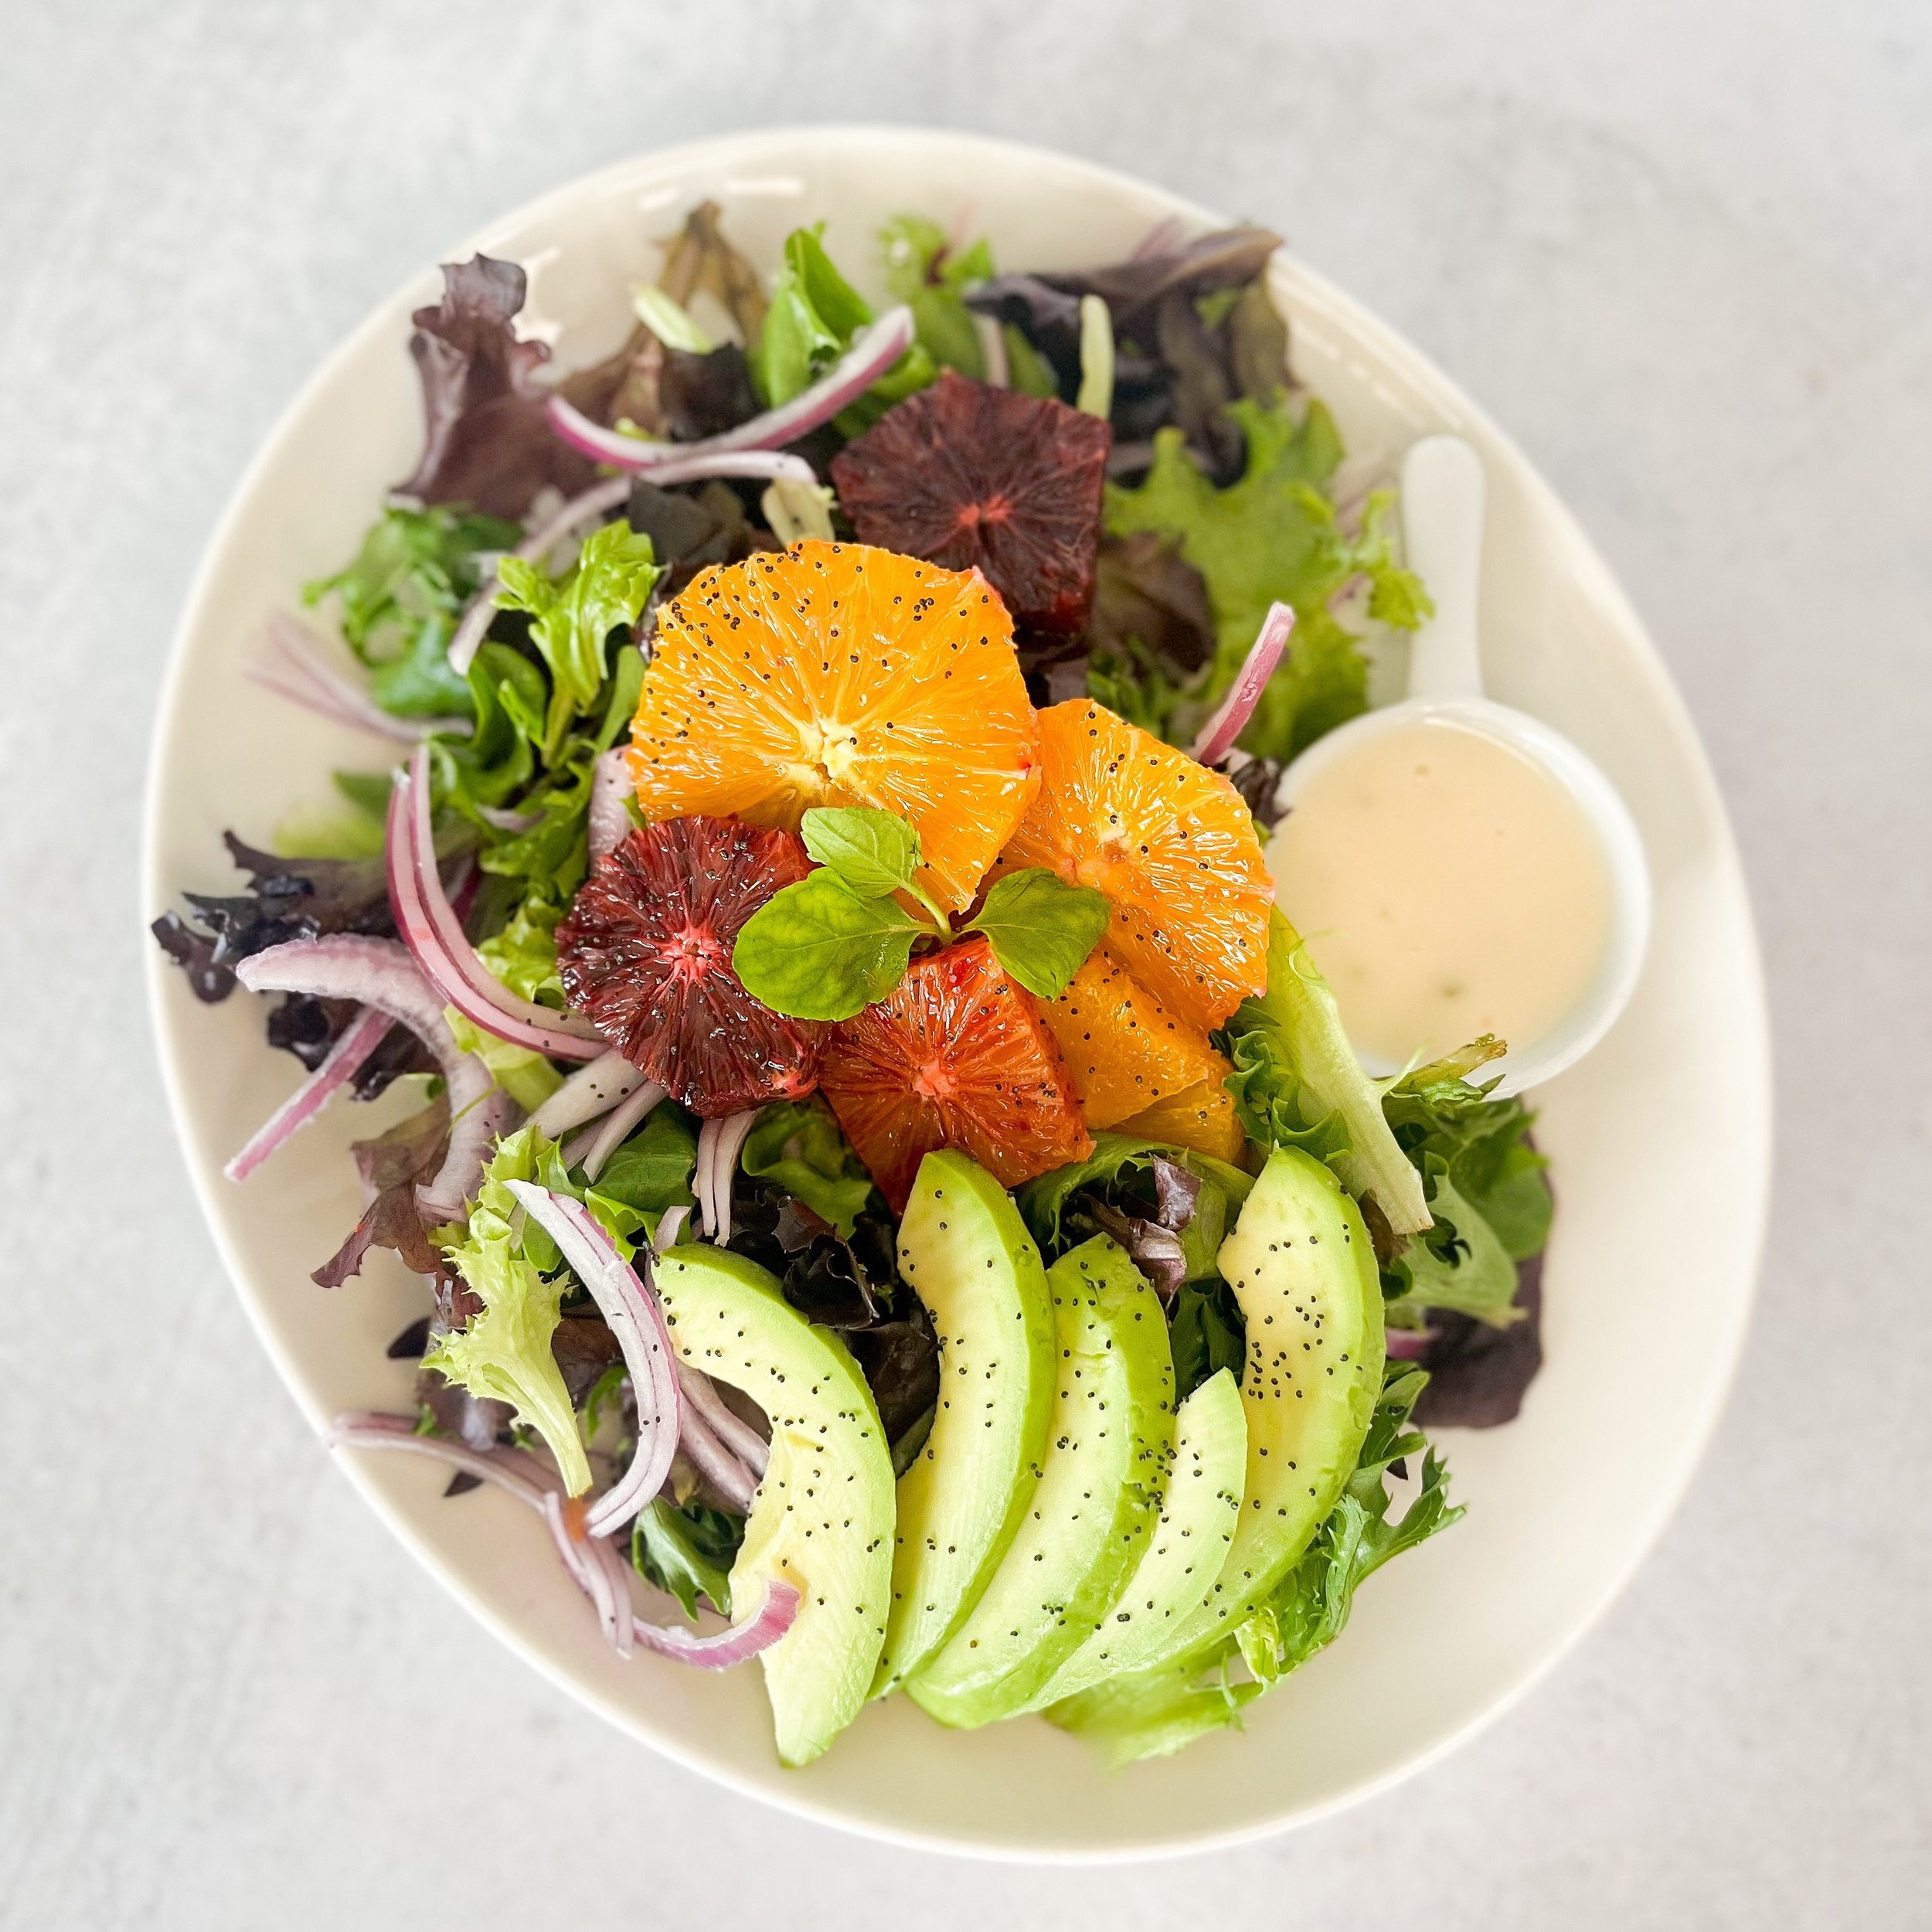 California Avenue location has a beautiful Citrus Avocado Salad this week 🍊🌞🥑 
A bed of baby greens topped with shaved red onion, fresh mint, poppyseeds, &amp; avocado with fresh segments of blood orange and naval oranges served with a citrus mint